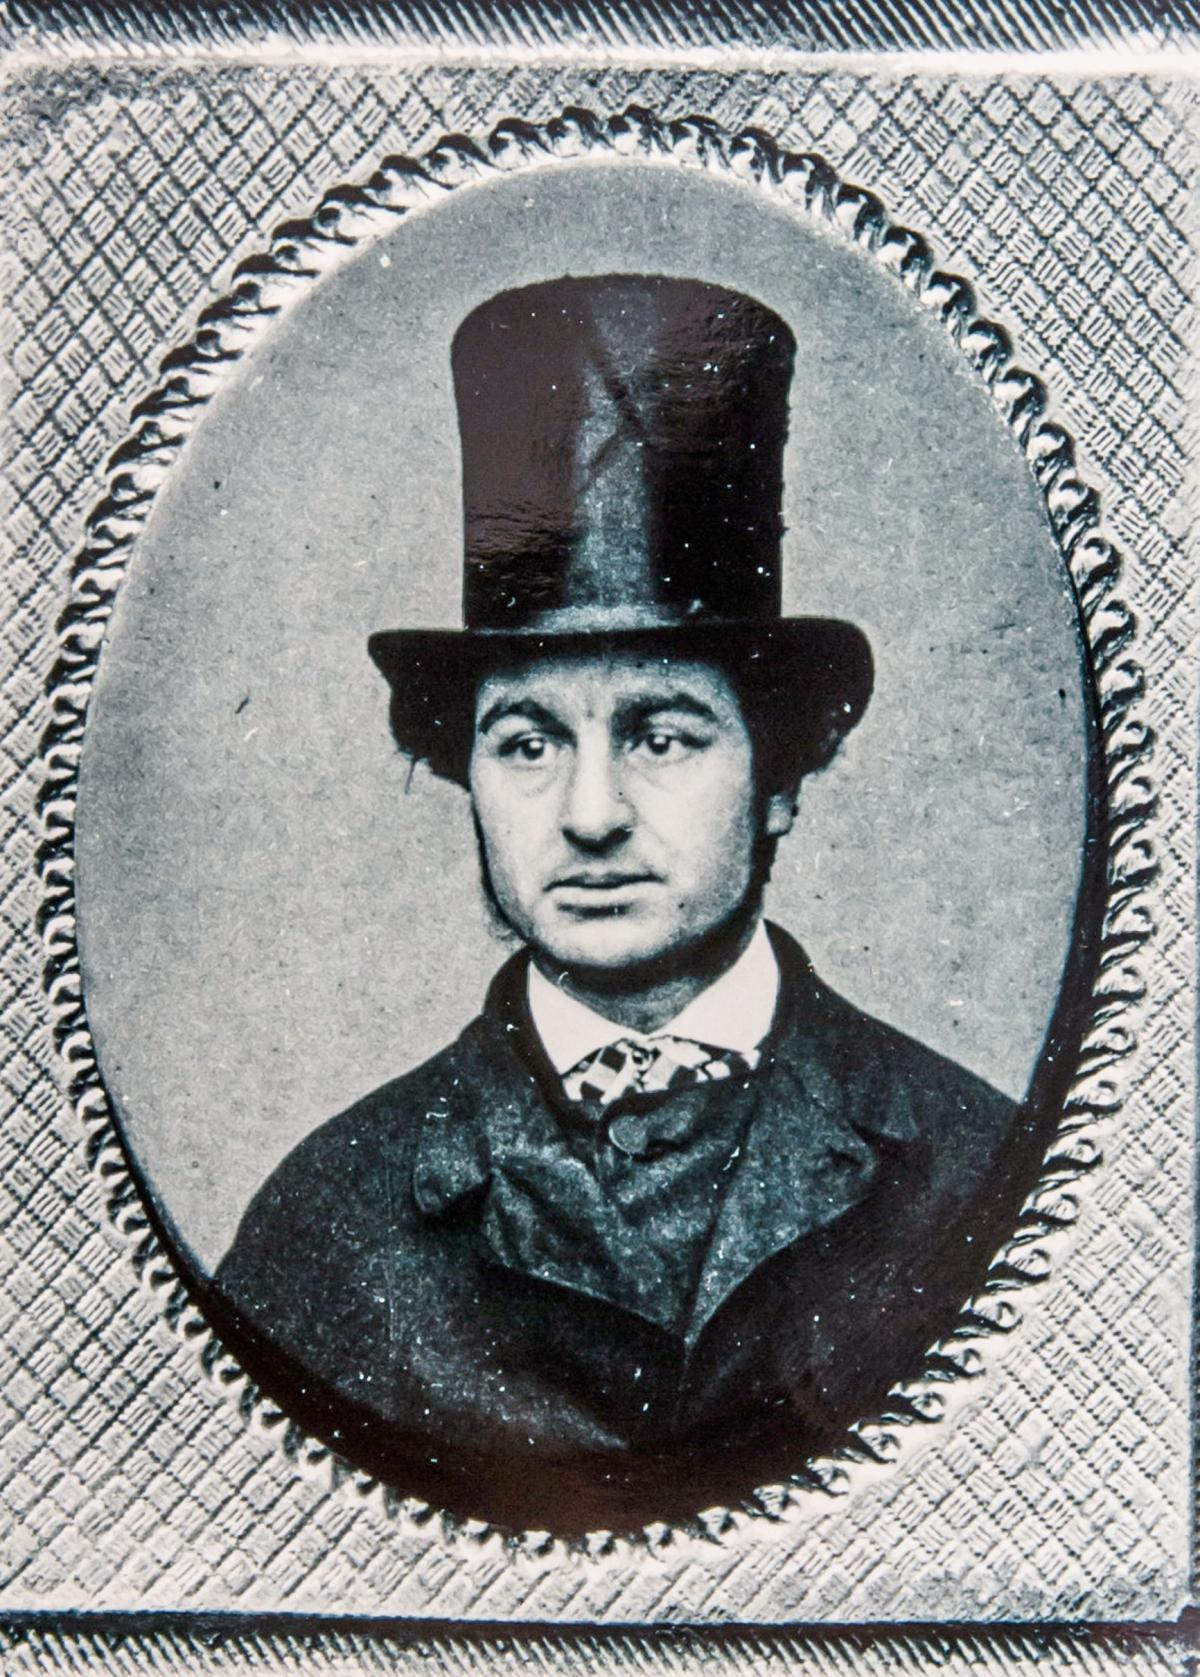 Mugshot of an unknown man in a rather fetching stovepipe hat.